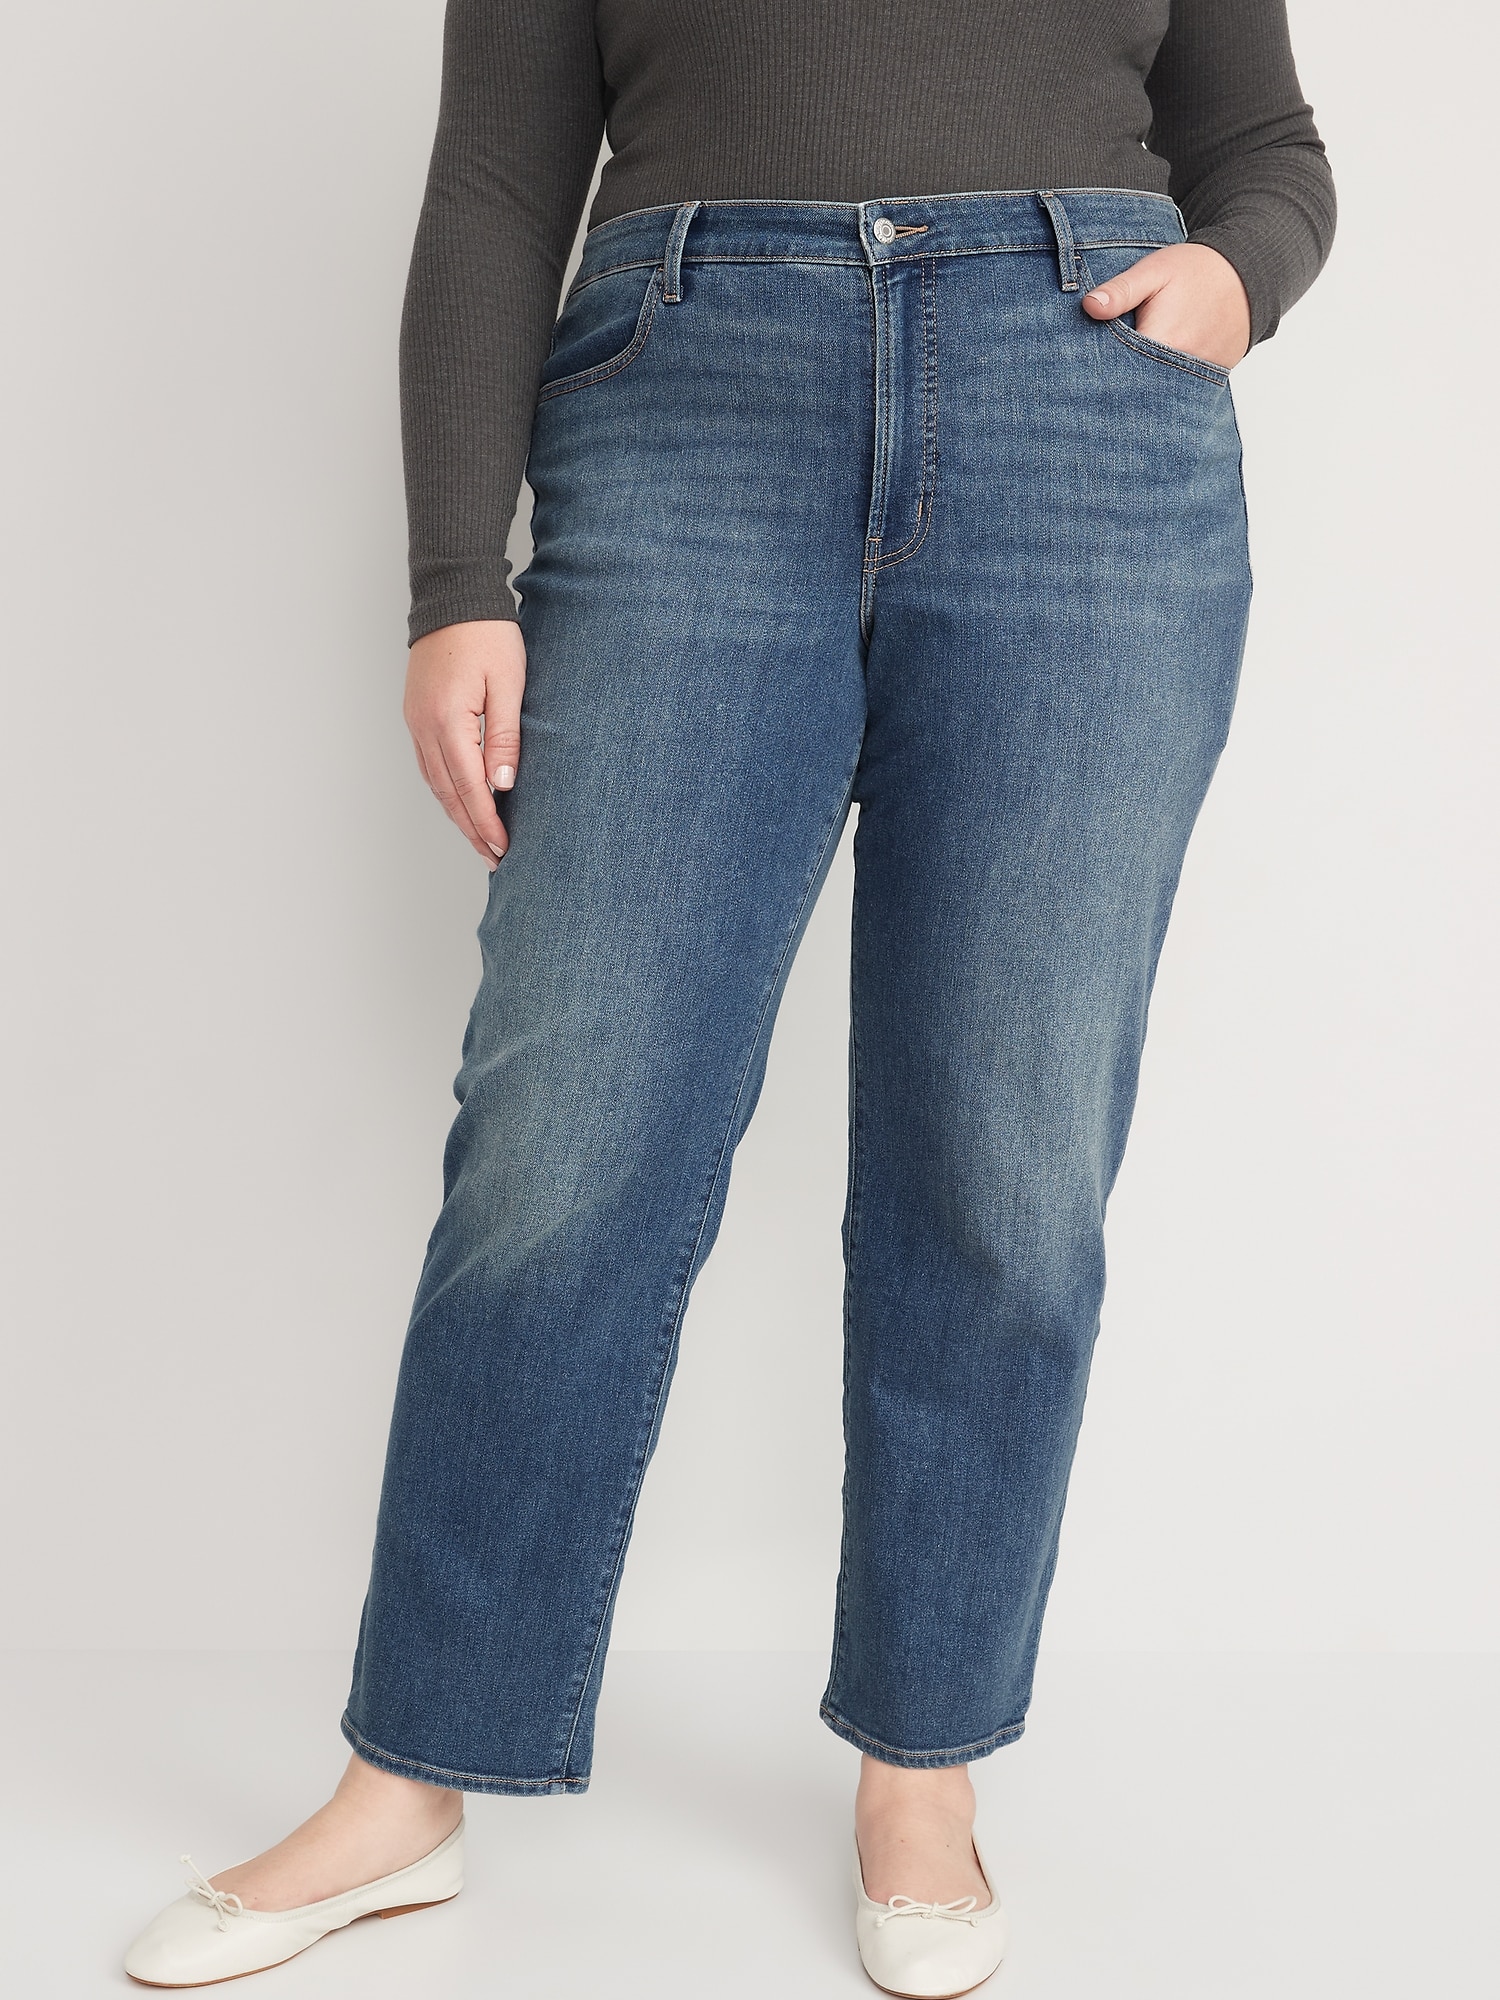 Old Navy Dark Blue High Rise Wow Straight Jeans Women's 12 New - beyond  exchange